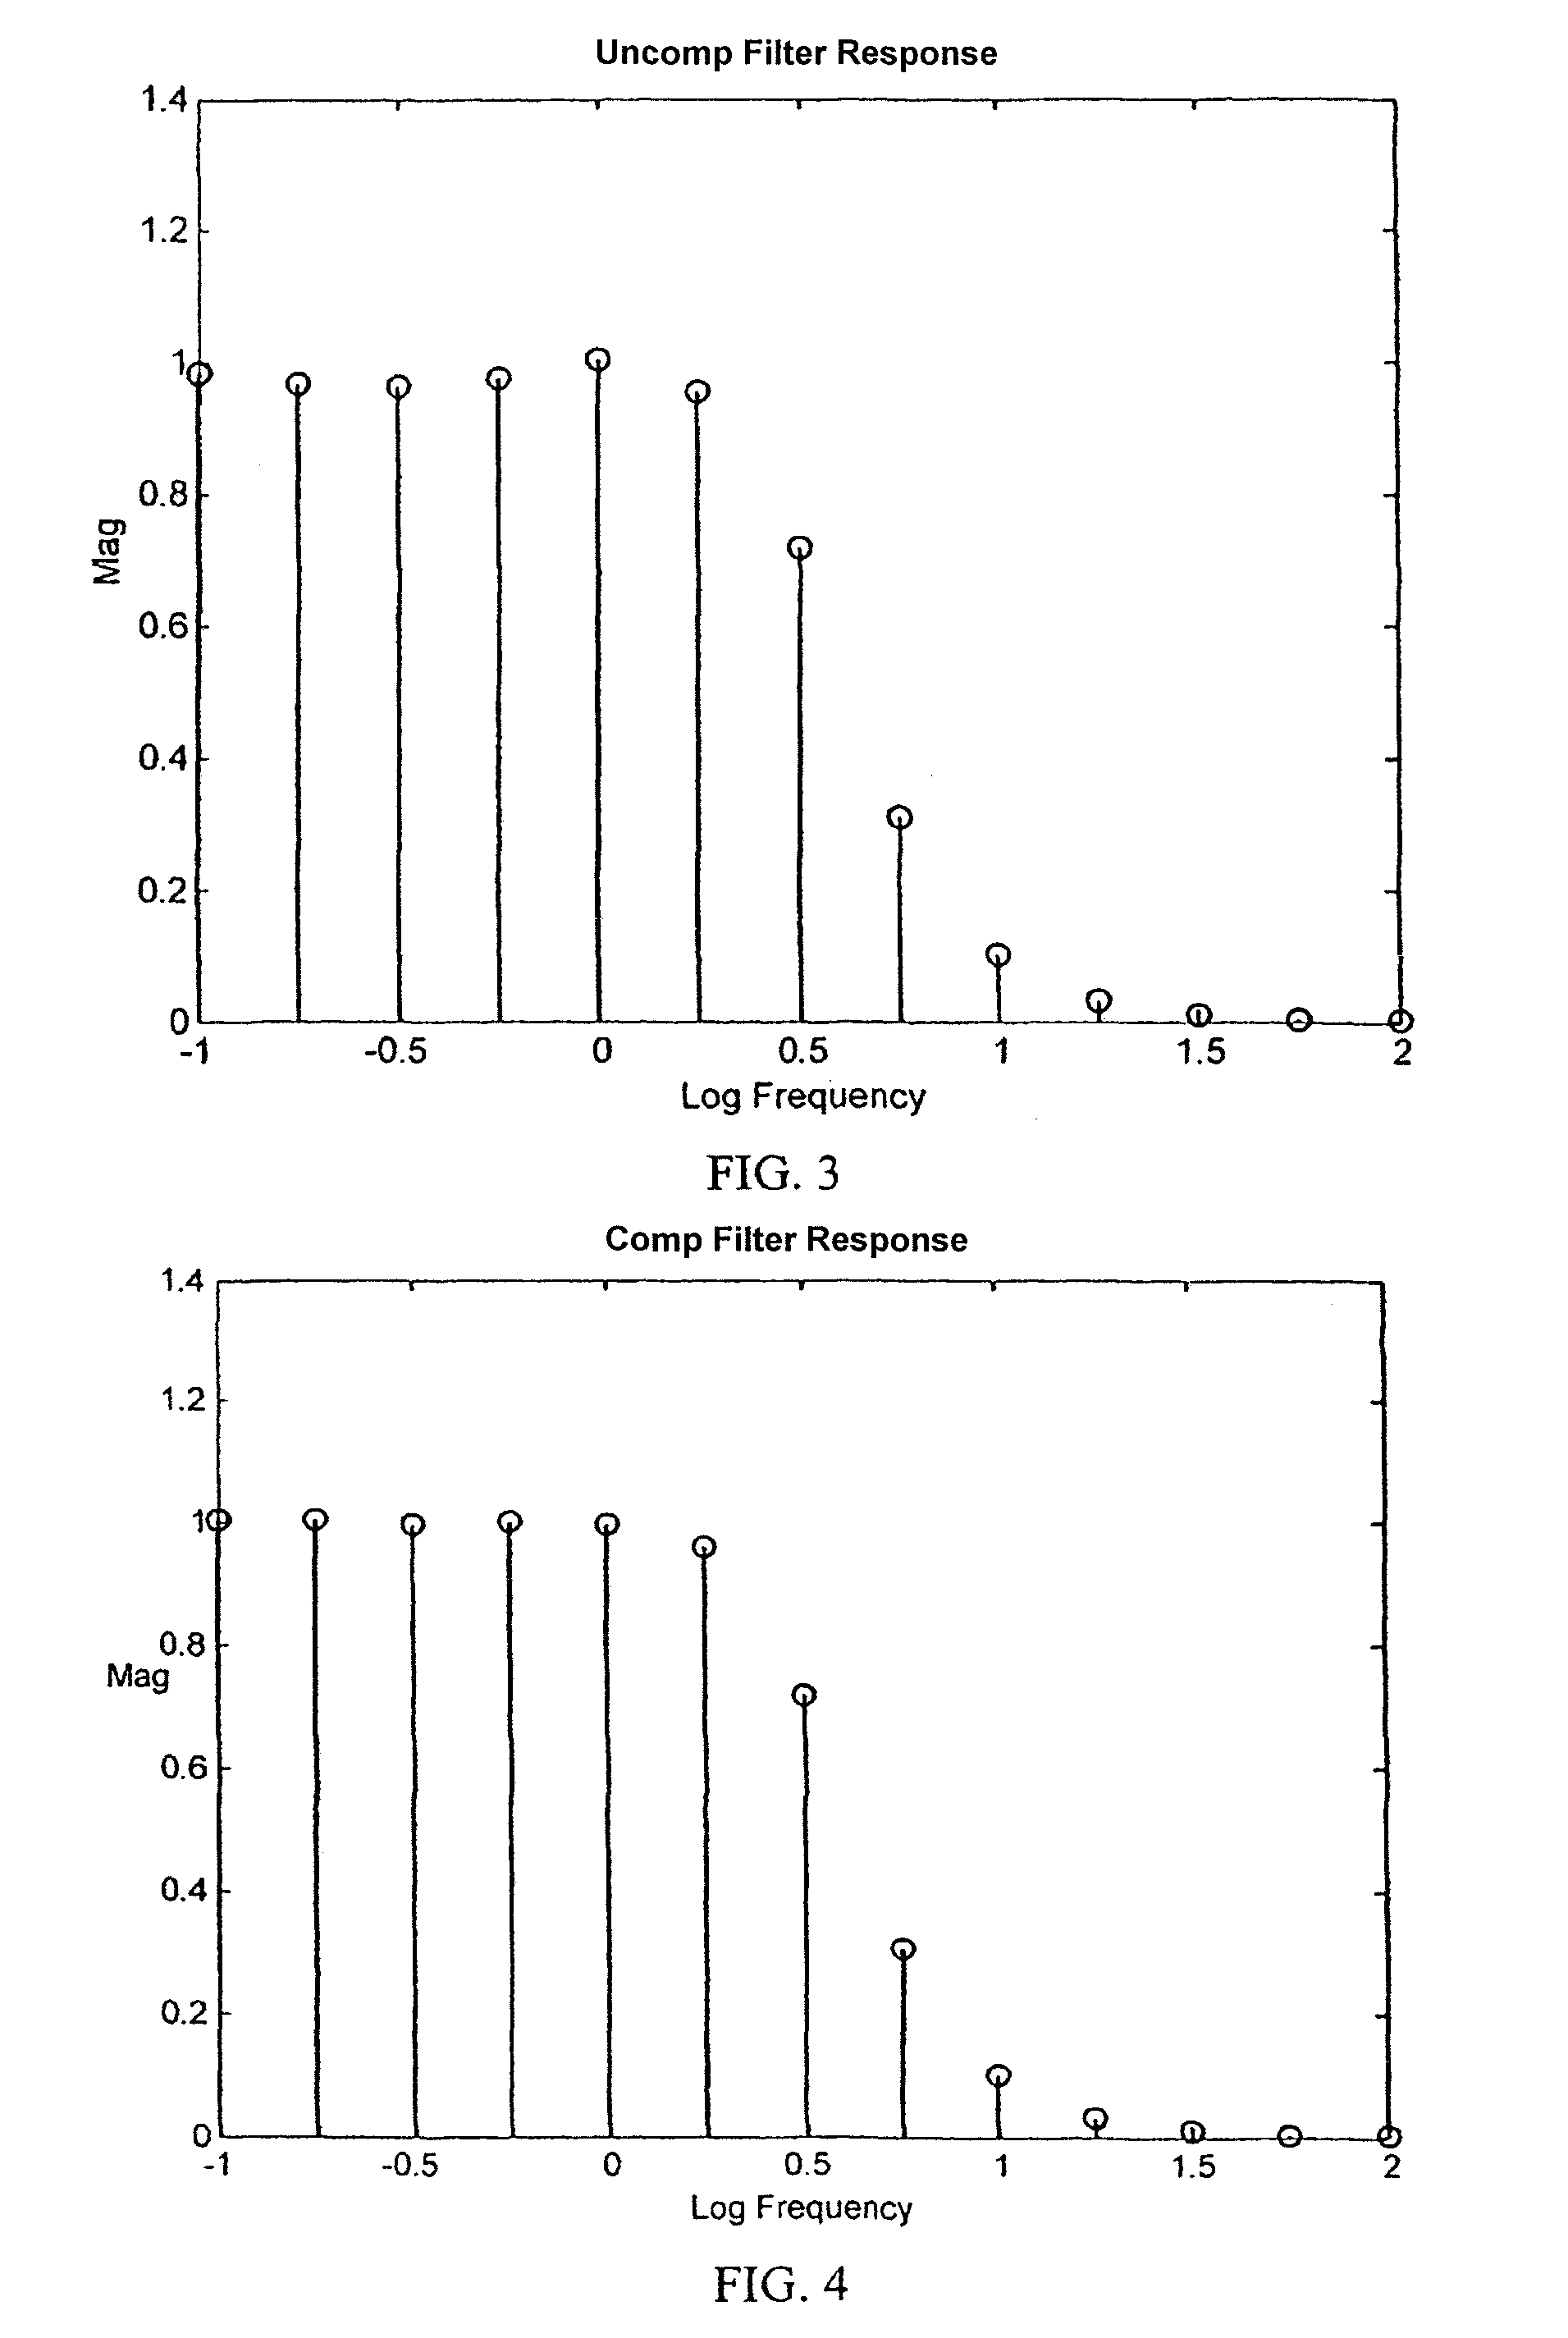 Method of detecting system function by measuring frequency response